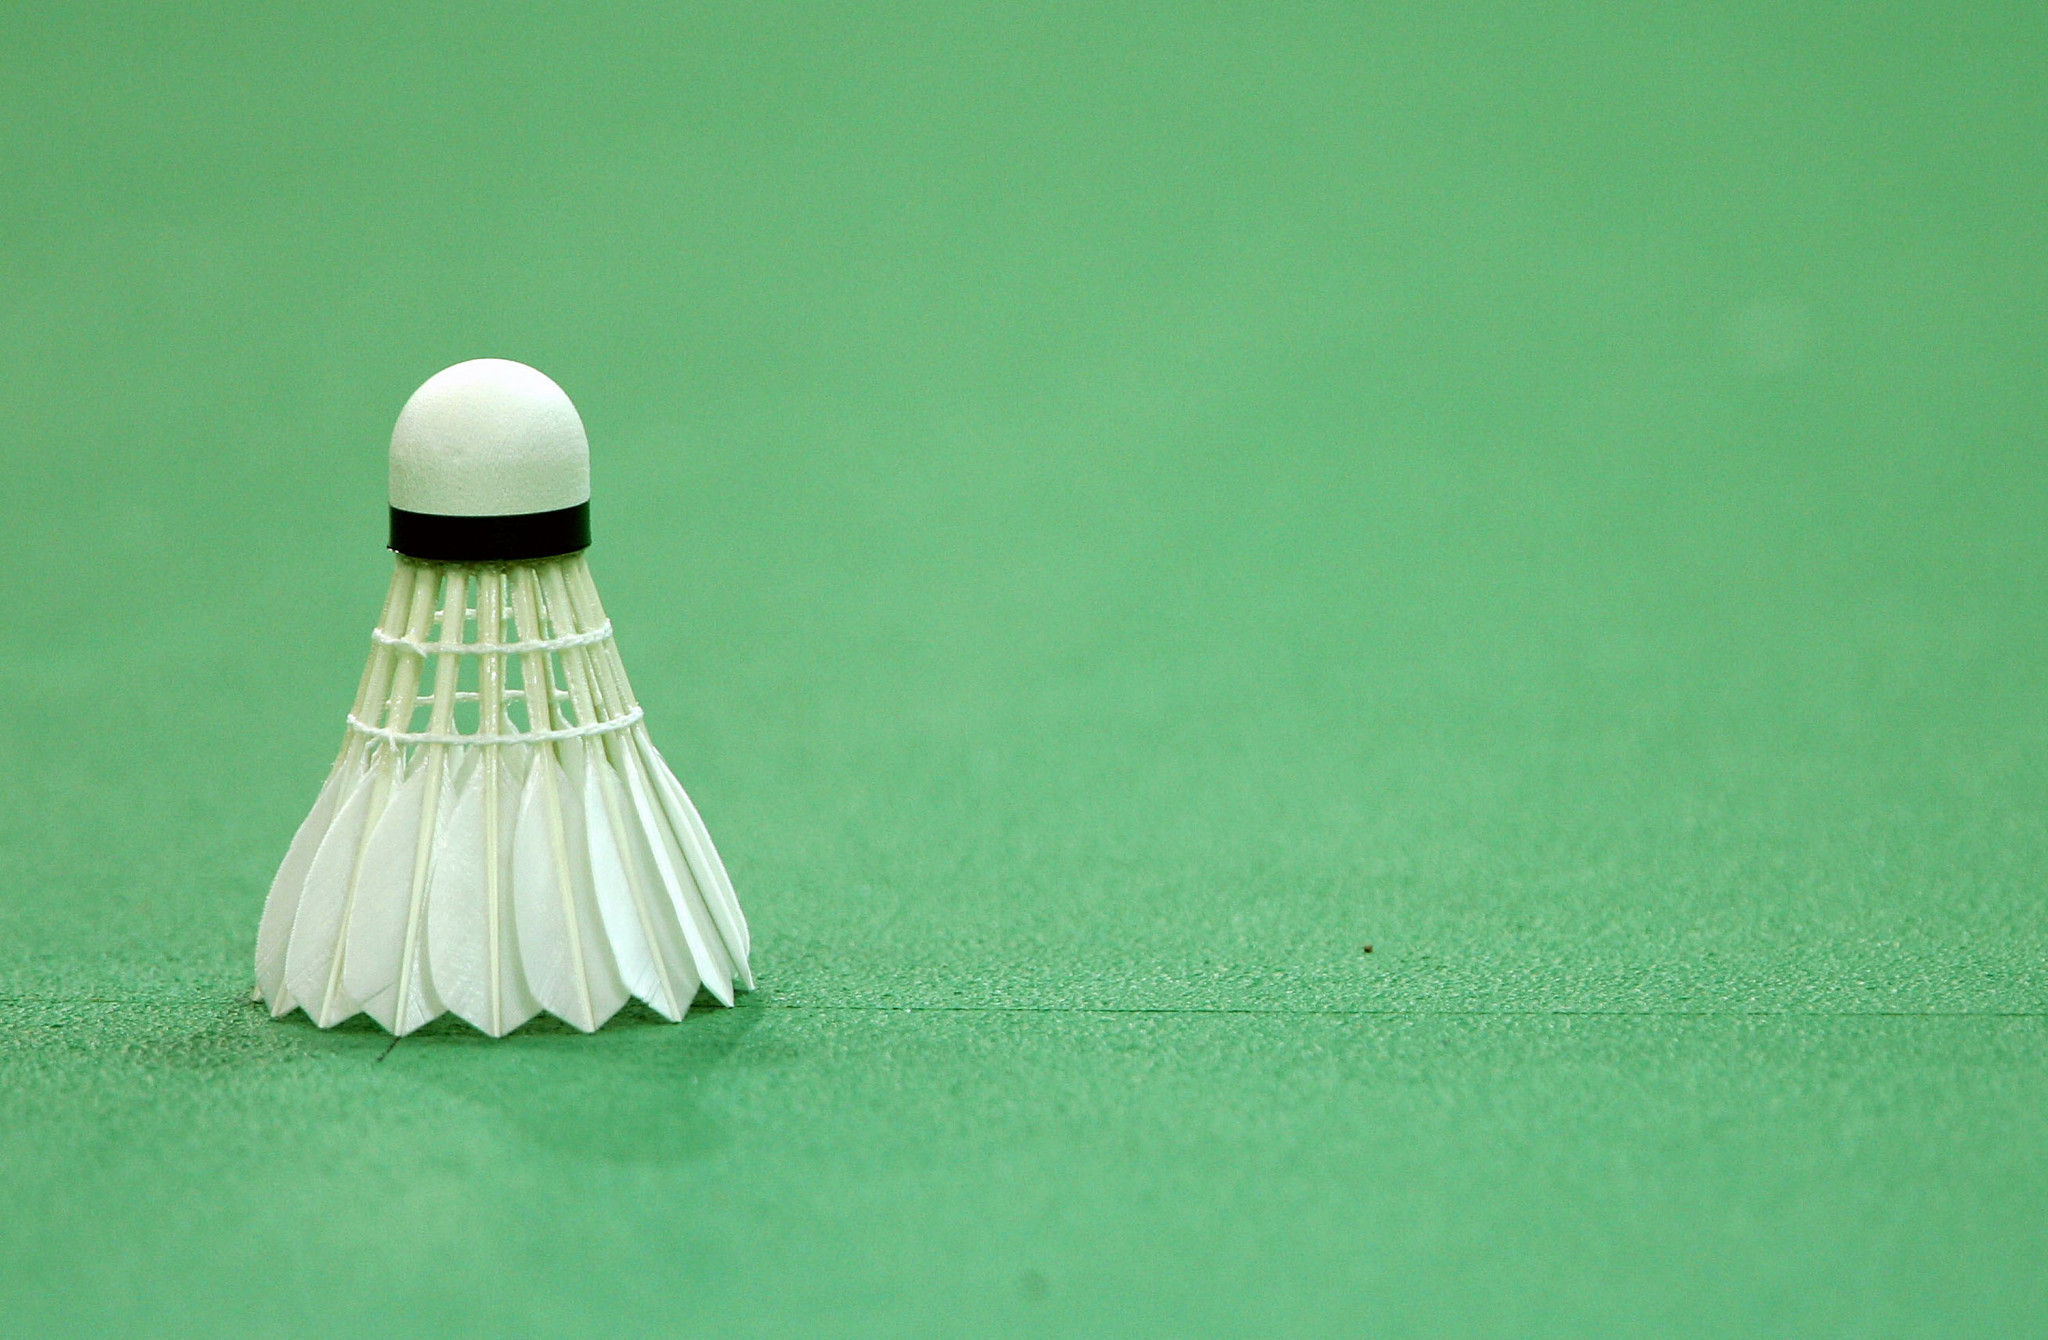 Three more continental Para-badminton championships have been removed from the 2020 calendar due to the coronavirus pandemic ©Getty Images